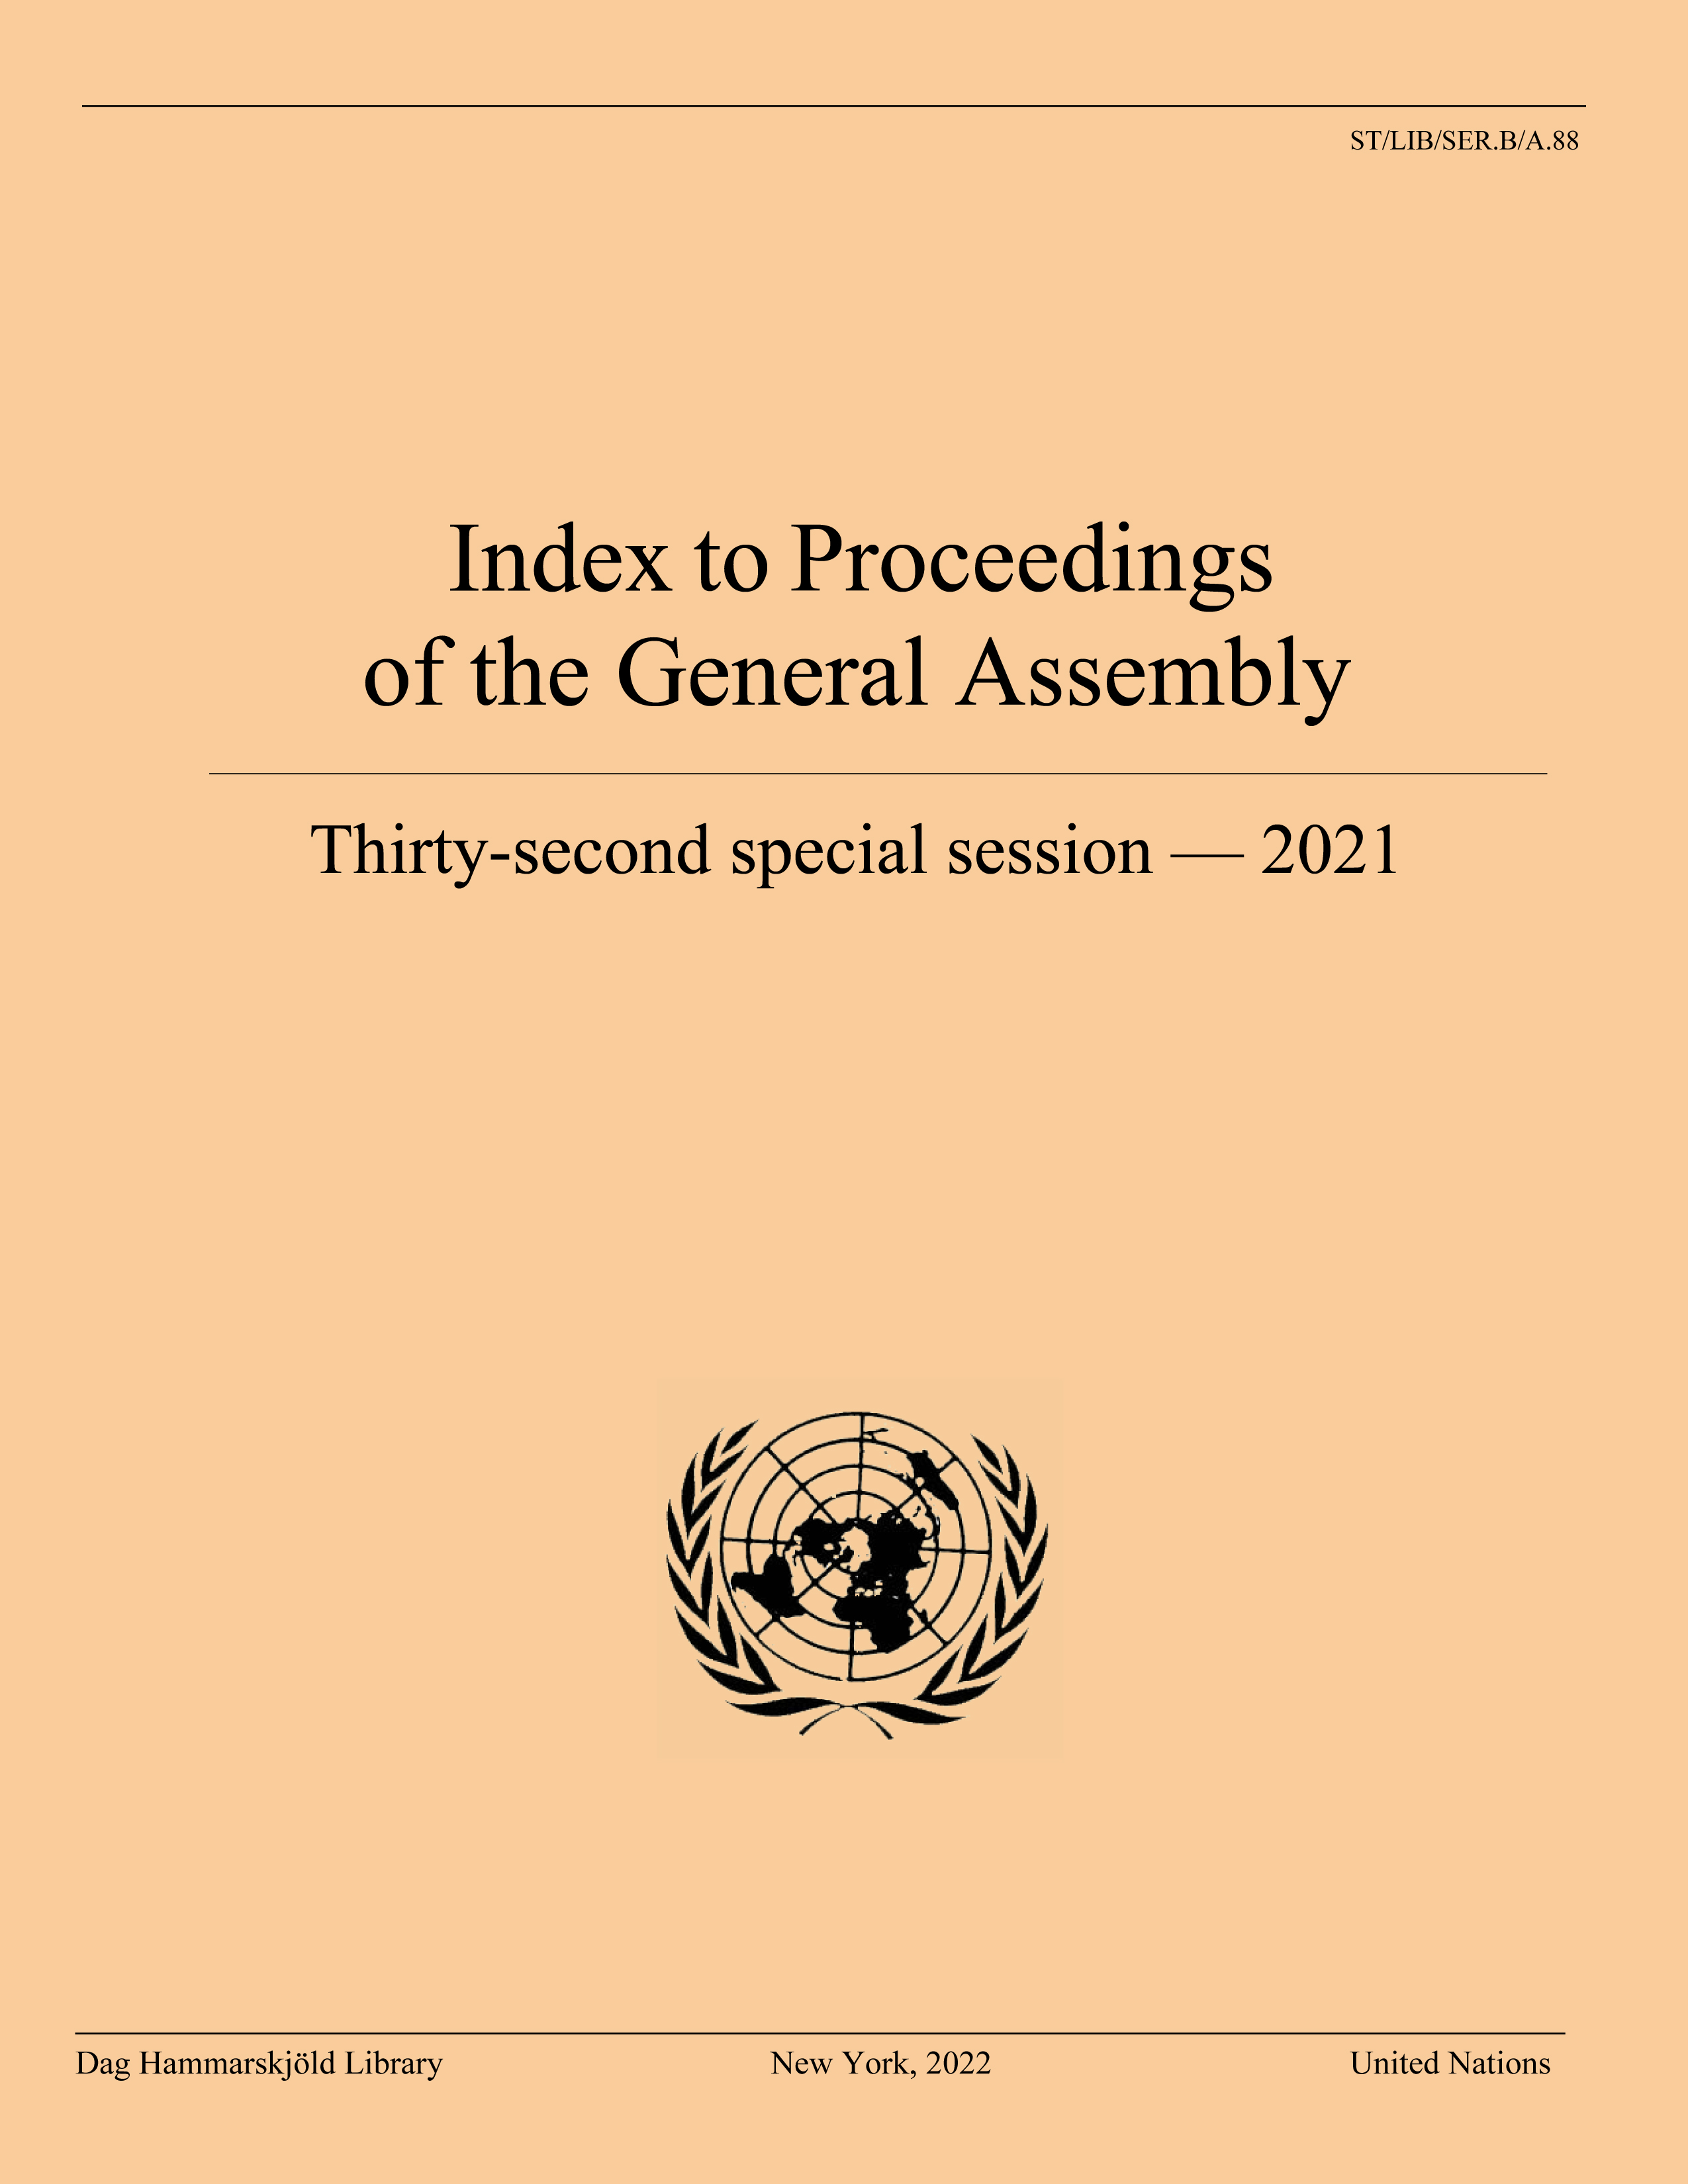 image of Index to Proceedings of the General Assembly 2021